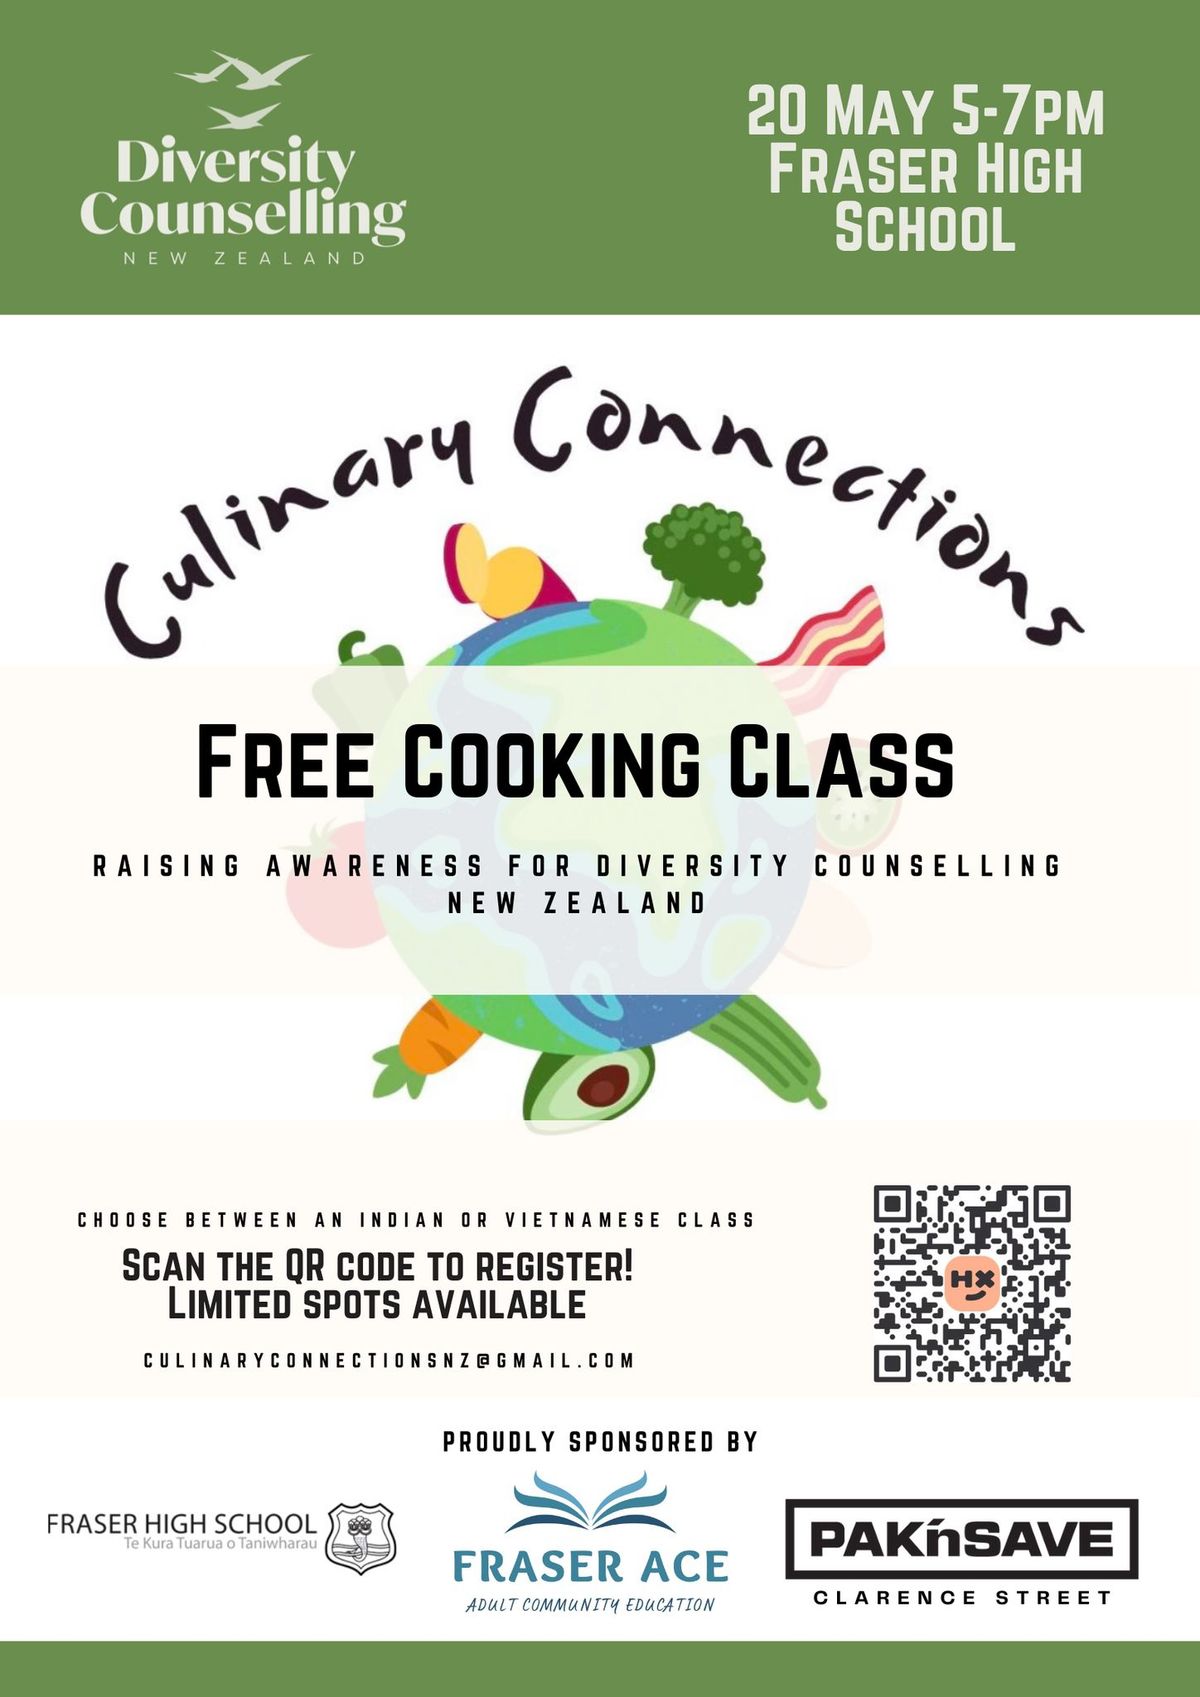 CULINARY CONNECTIONS - FREE COOKING CLASS 